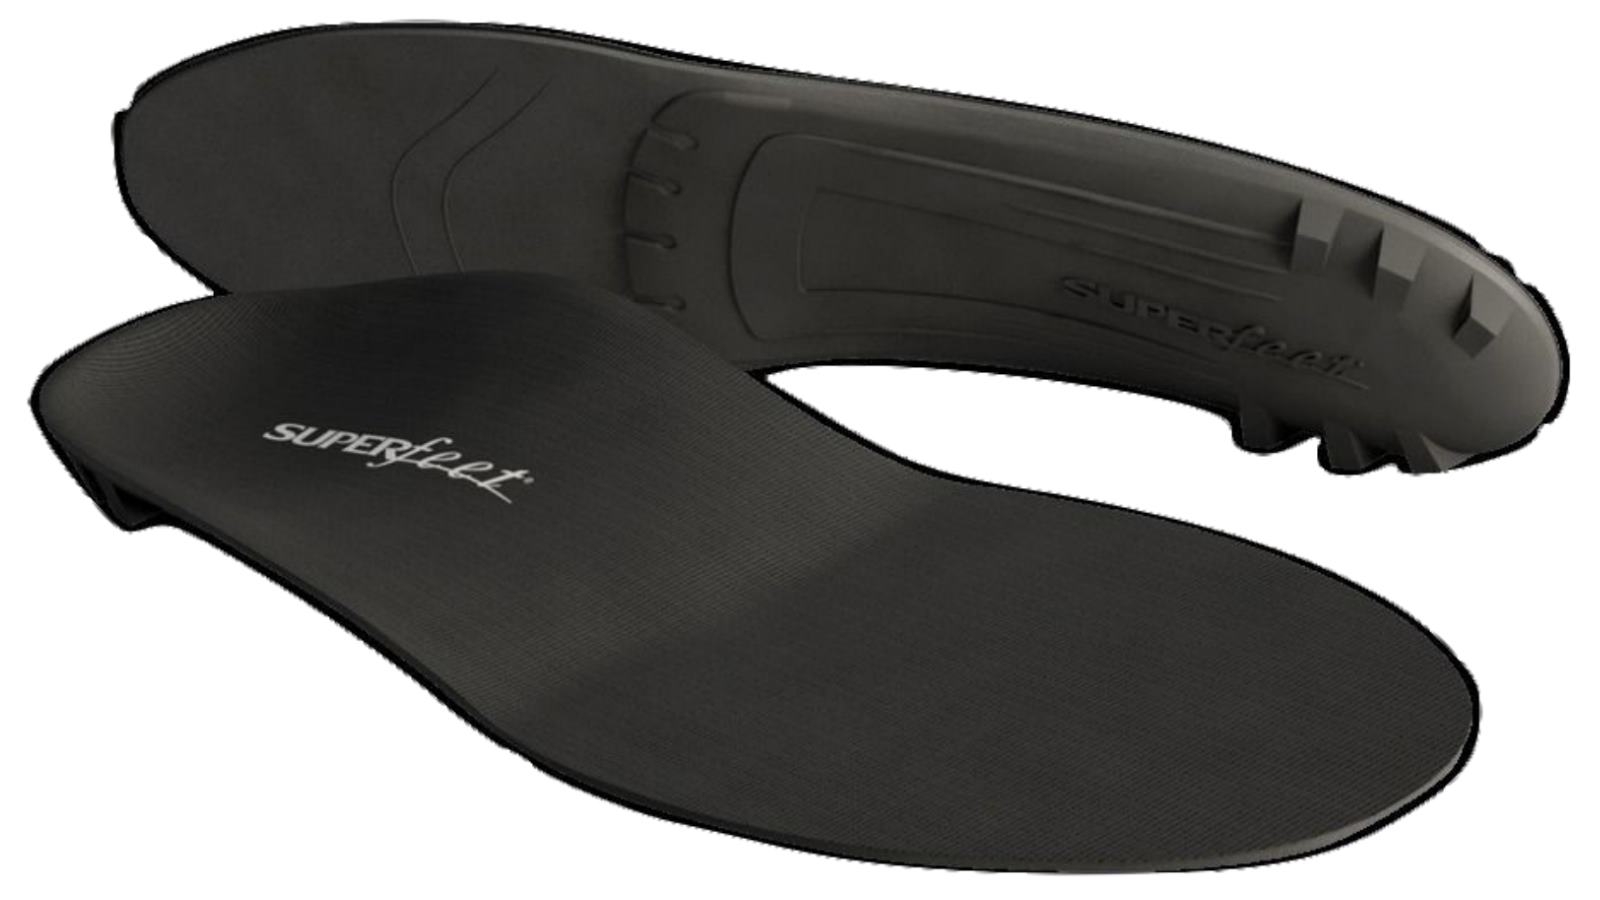 Superfeet Black Insoles Shoes Inserts 